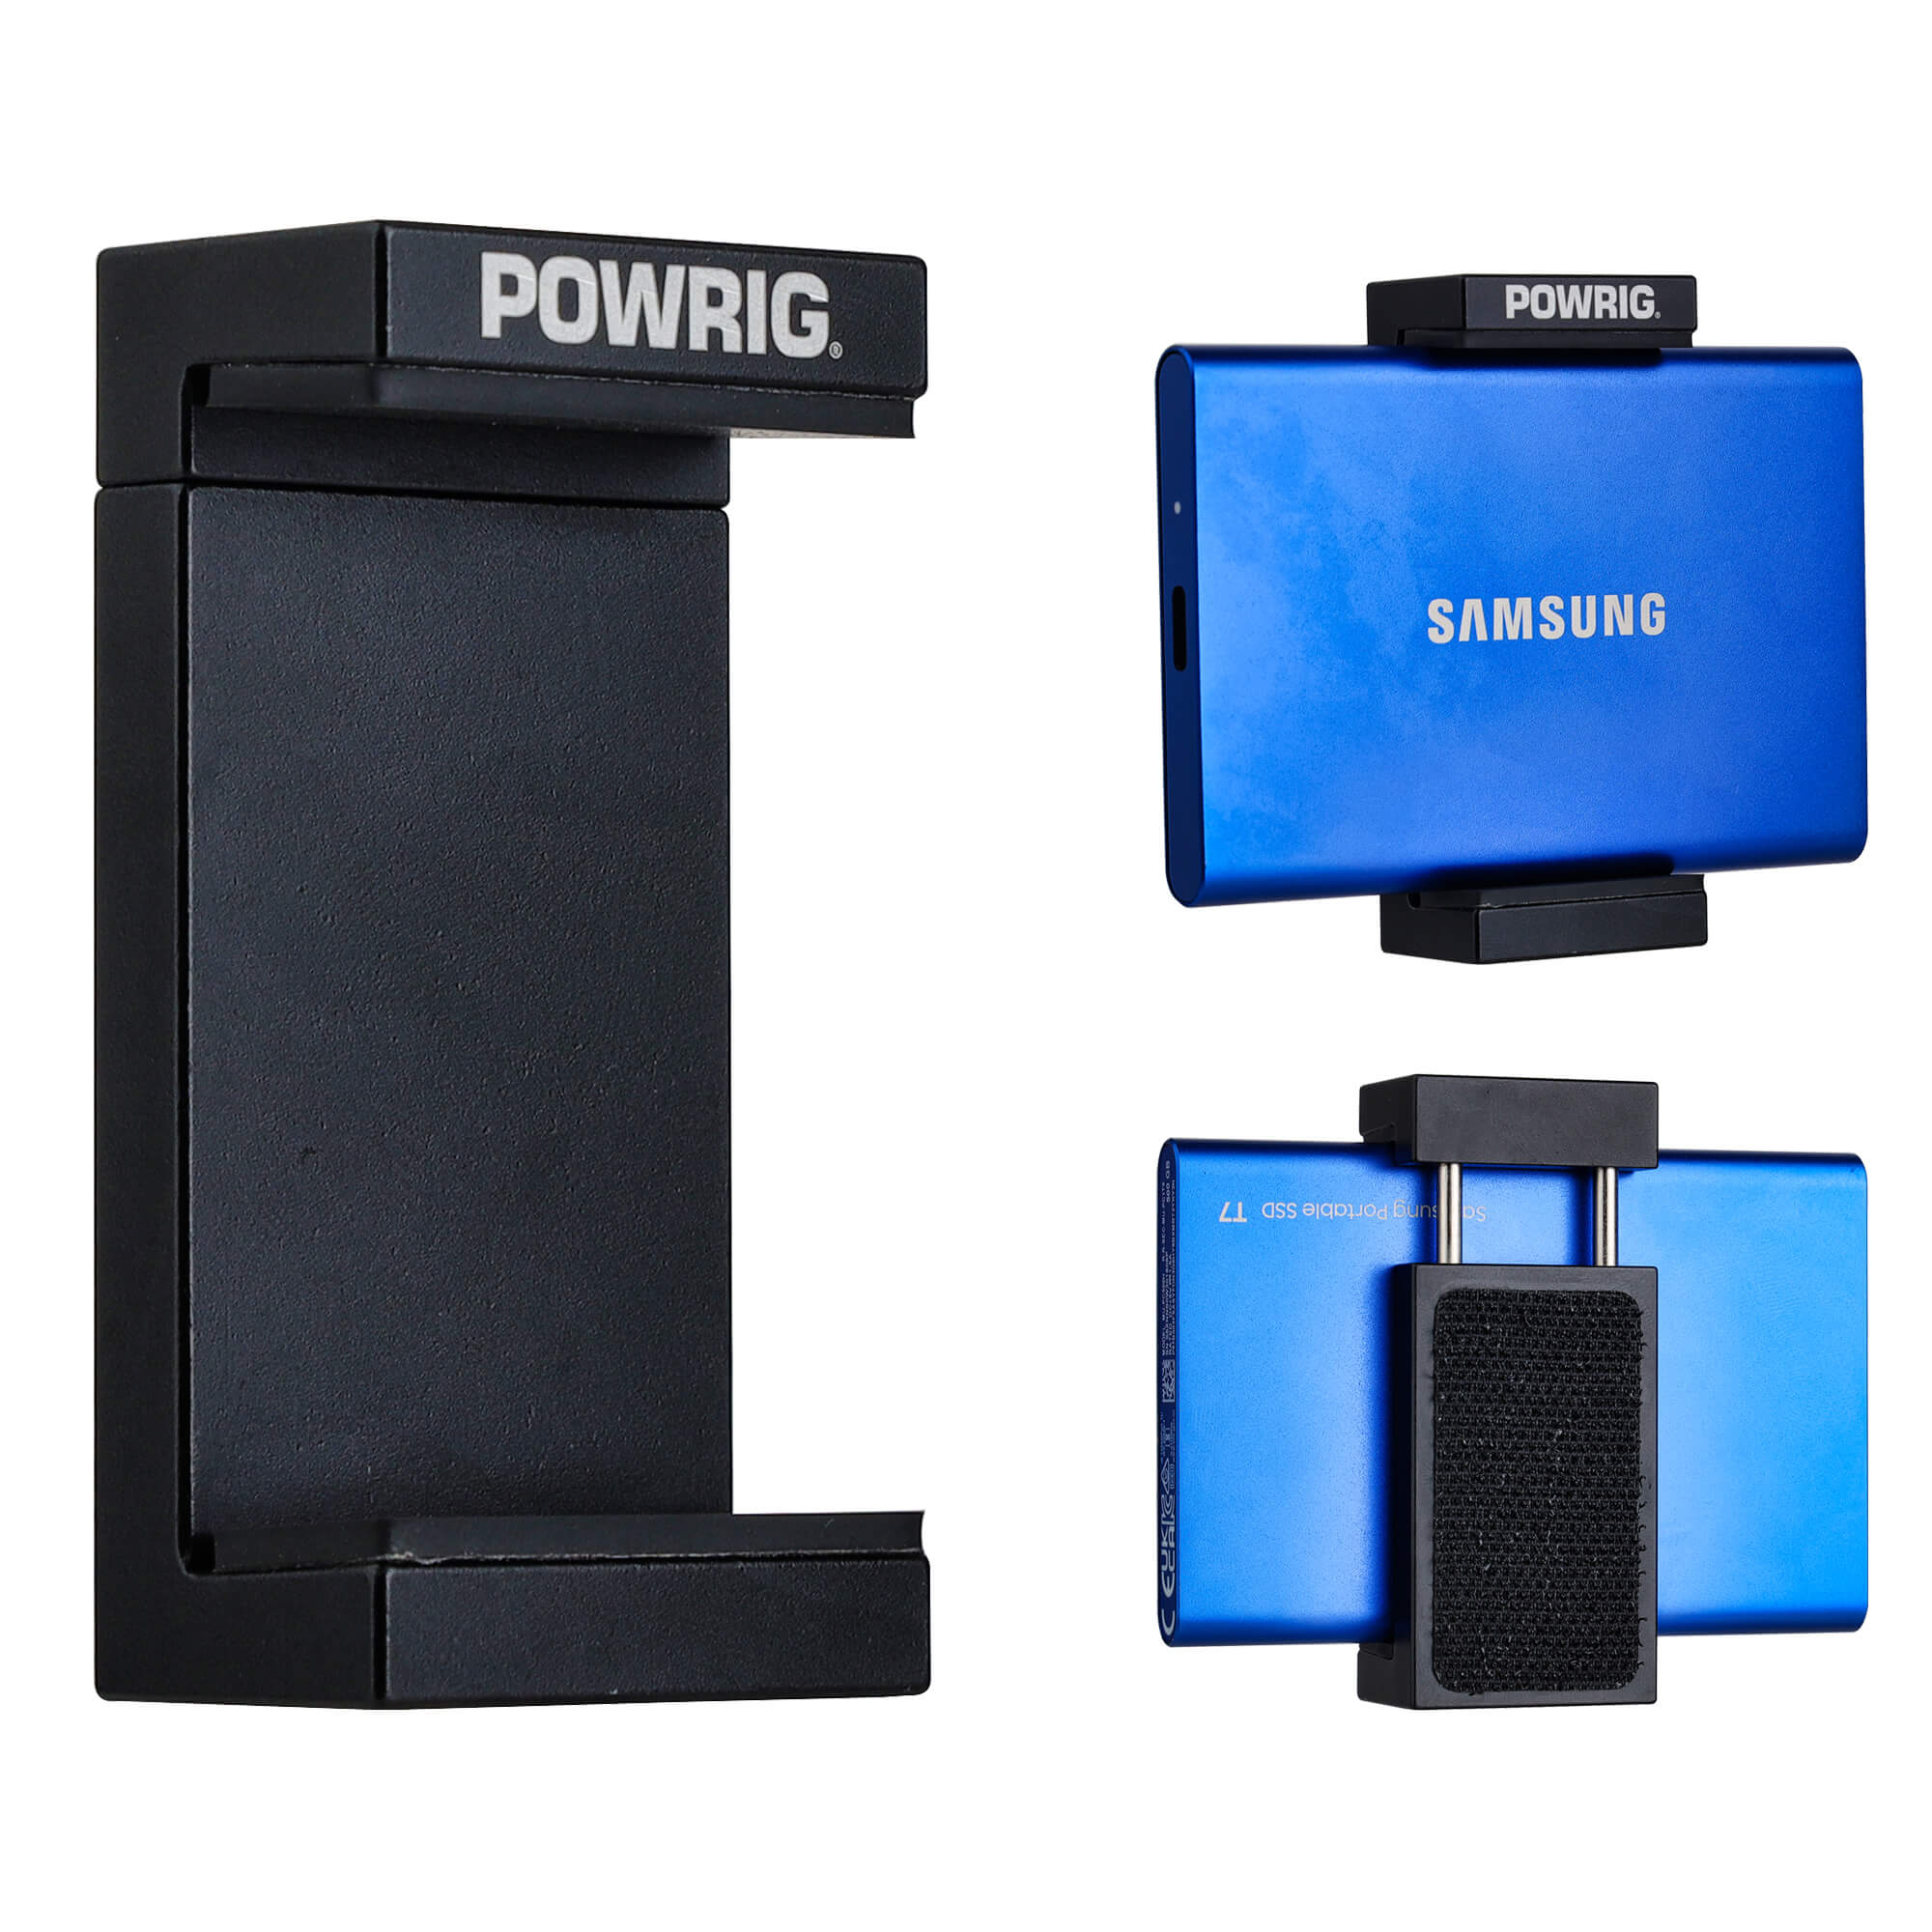 POWRIG SSD mount for Laptop, PC, PS5, XBOX – Photo & Video Gears